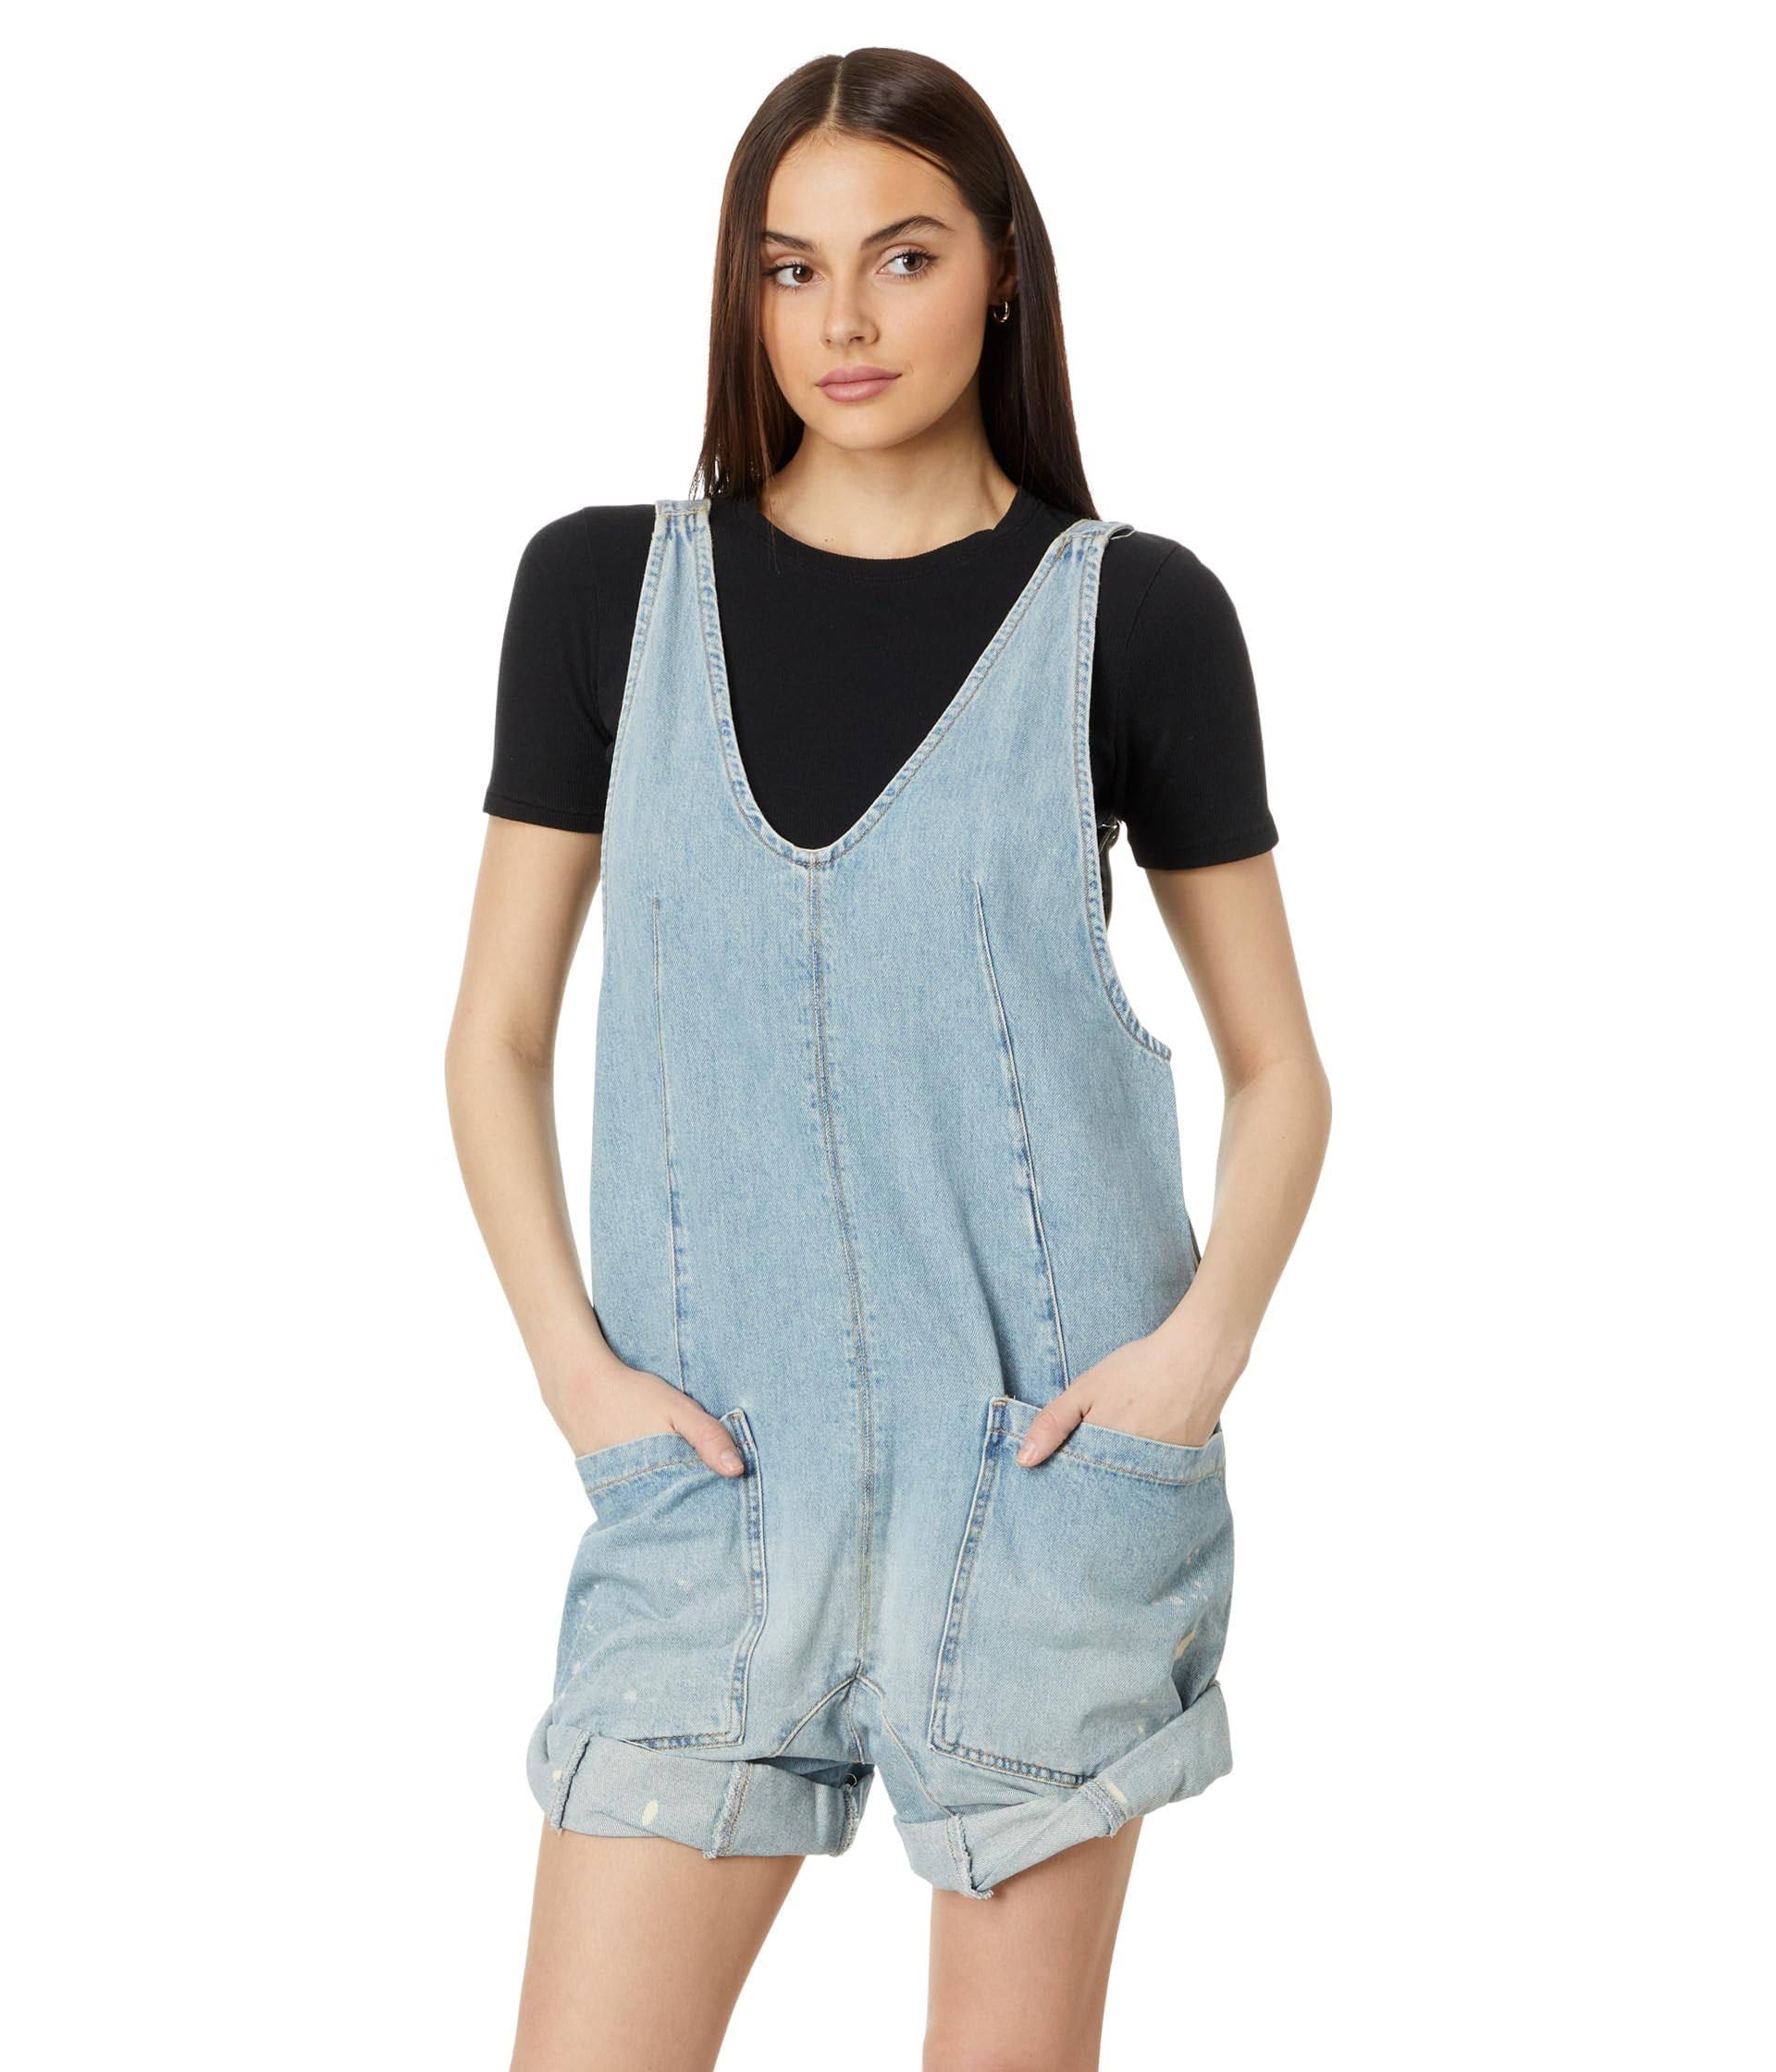 Comfy Relaxed Shortall Jeans with Adjustable Straps | Image